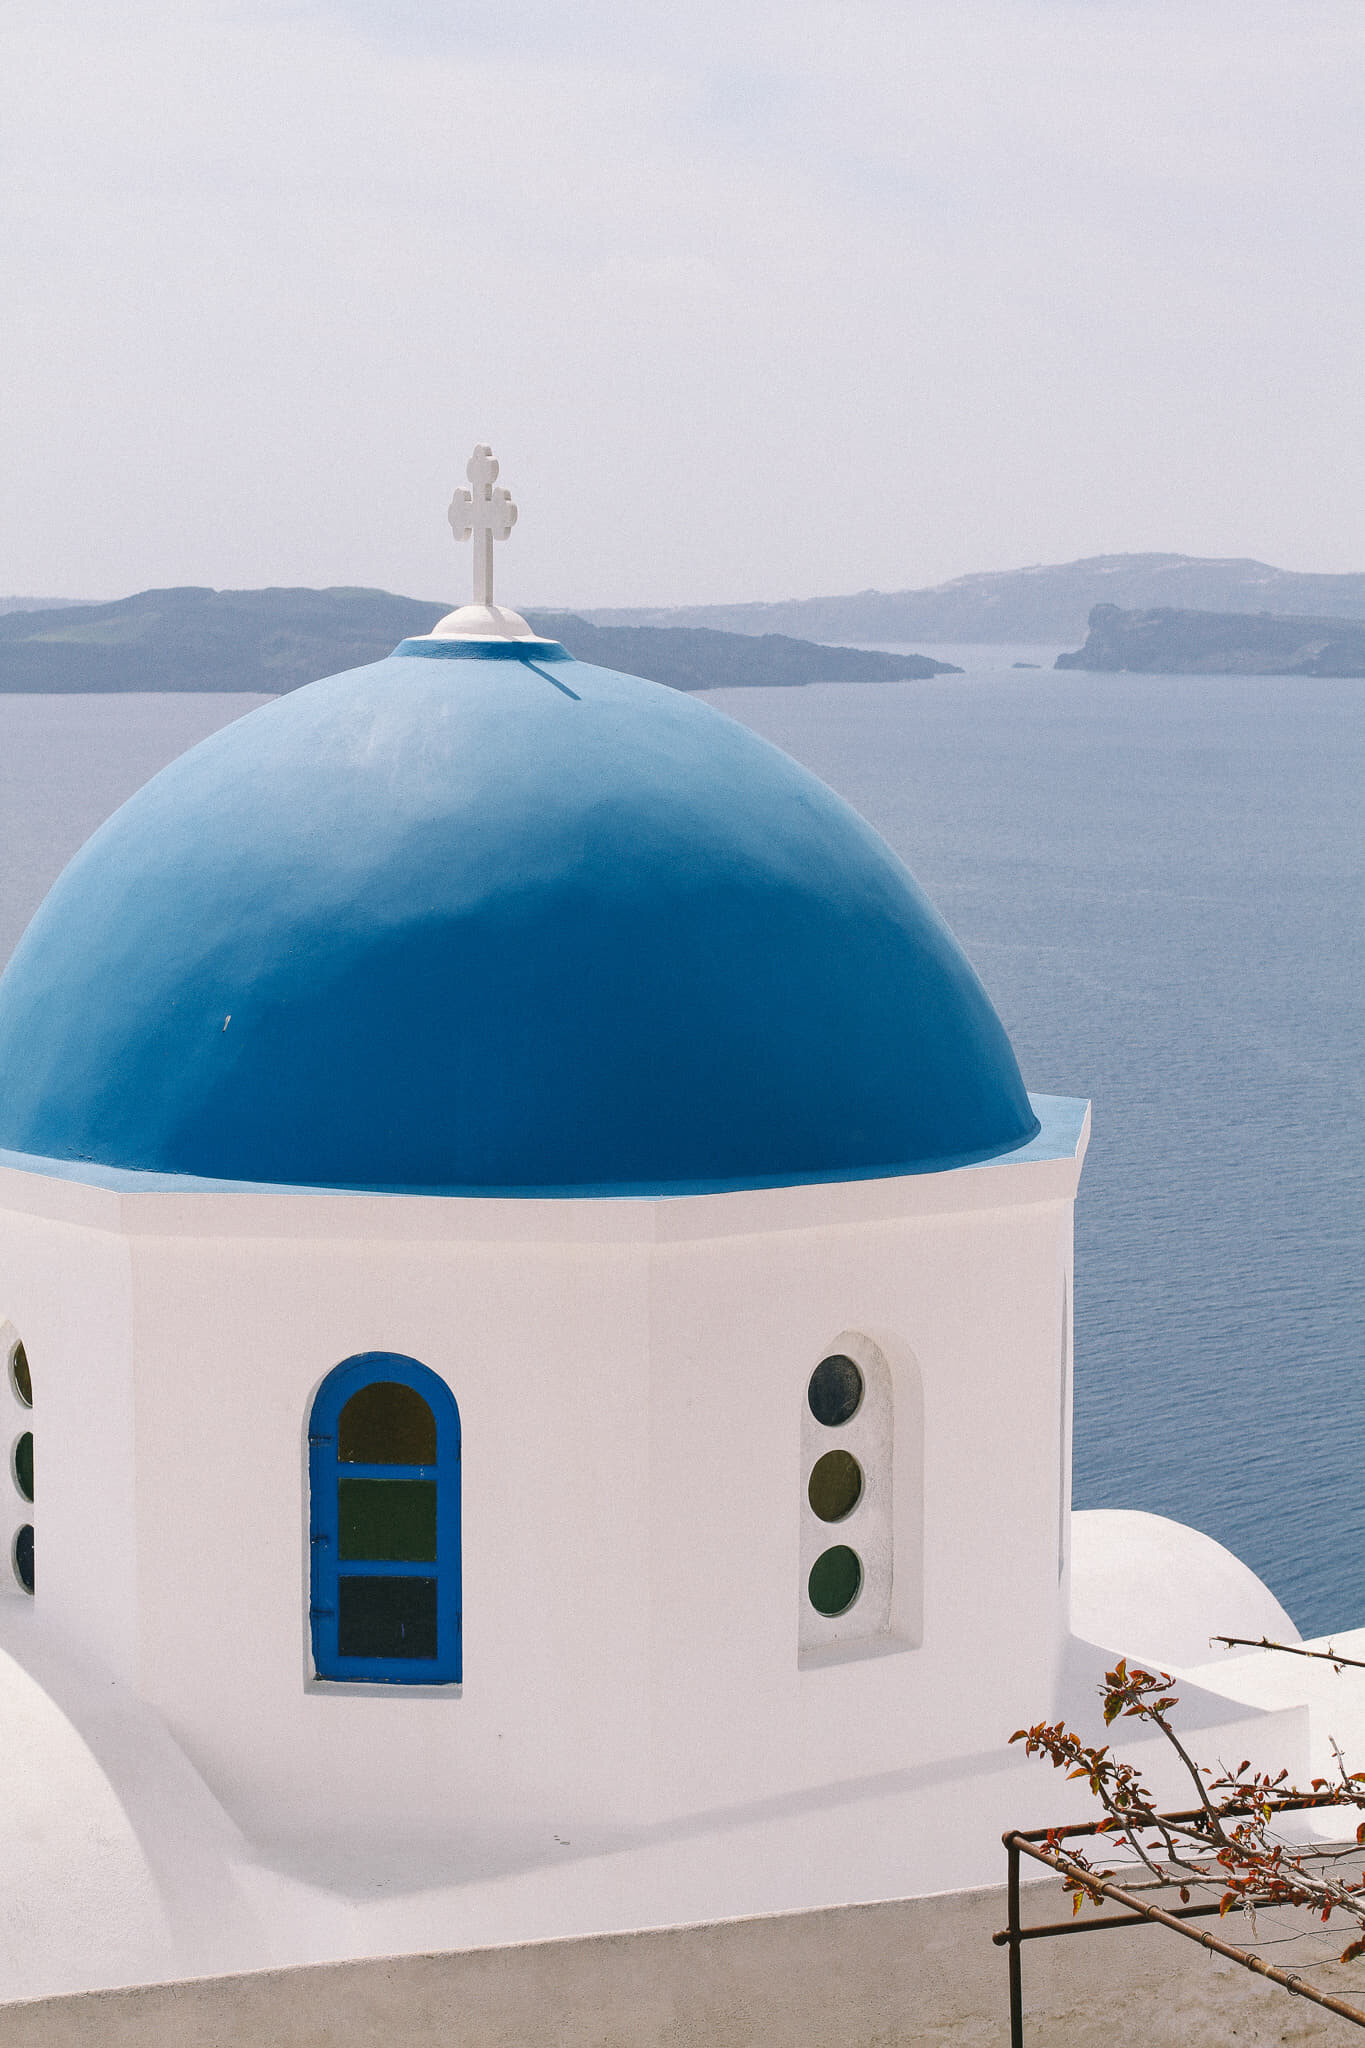 Santorini is made for relaxing in style. Here’s how to avoid the crowds, and things to do from morning strolls through Oia to sunning on a catamaran. Complete with a travel map and packing ideas!